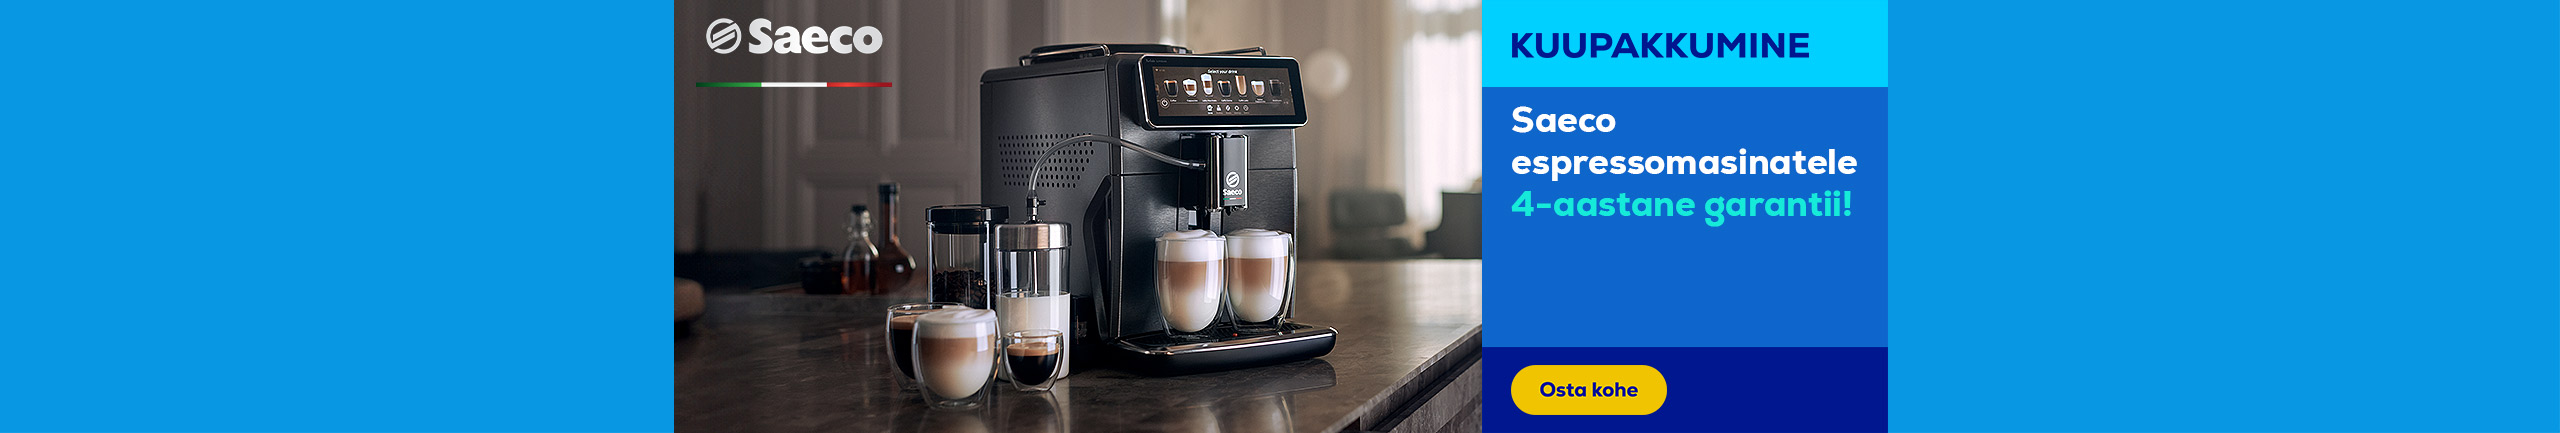 Free extended 2 years warranty with Saeco espresso machine